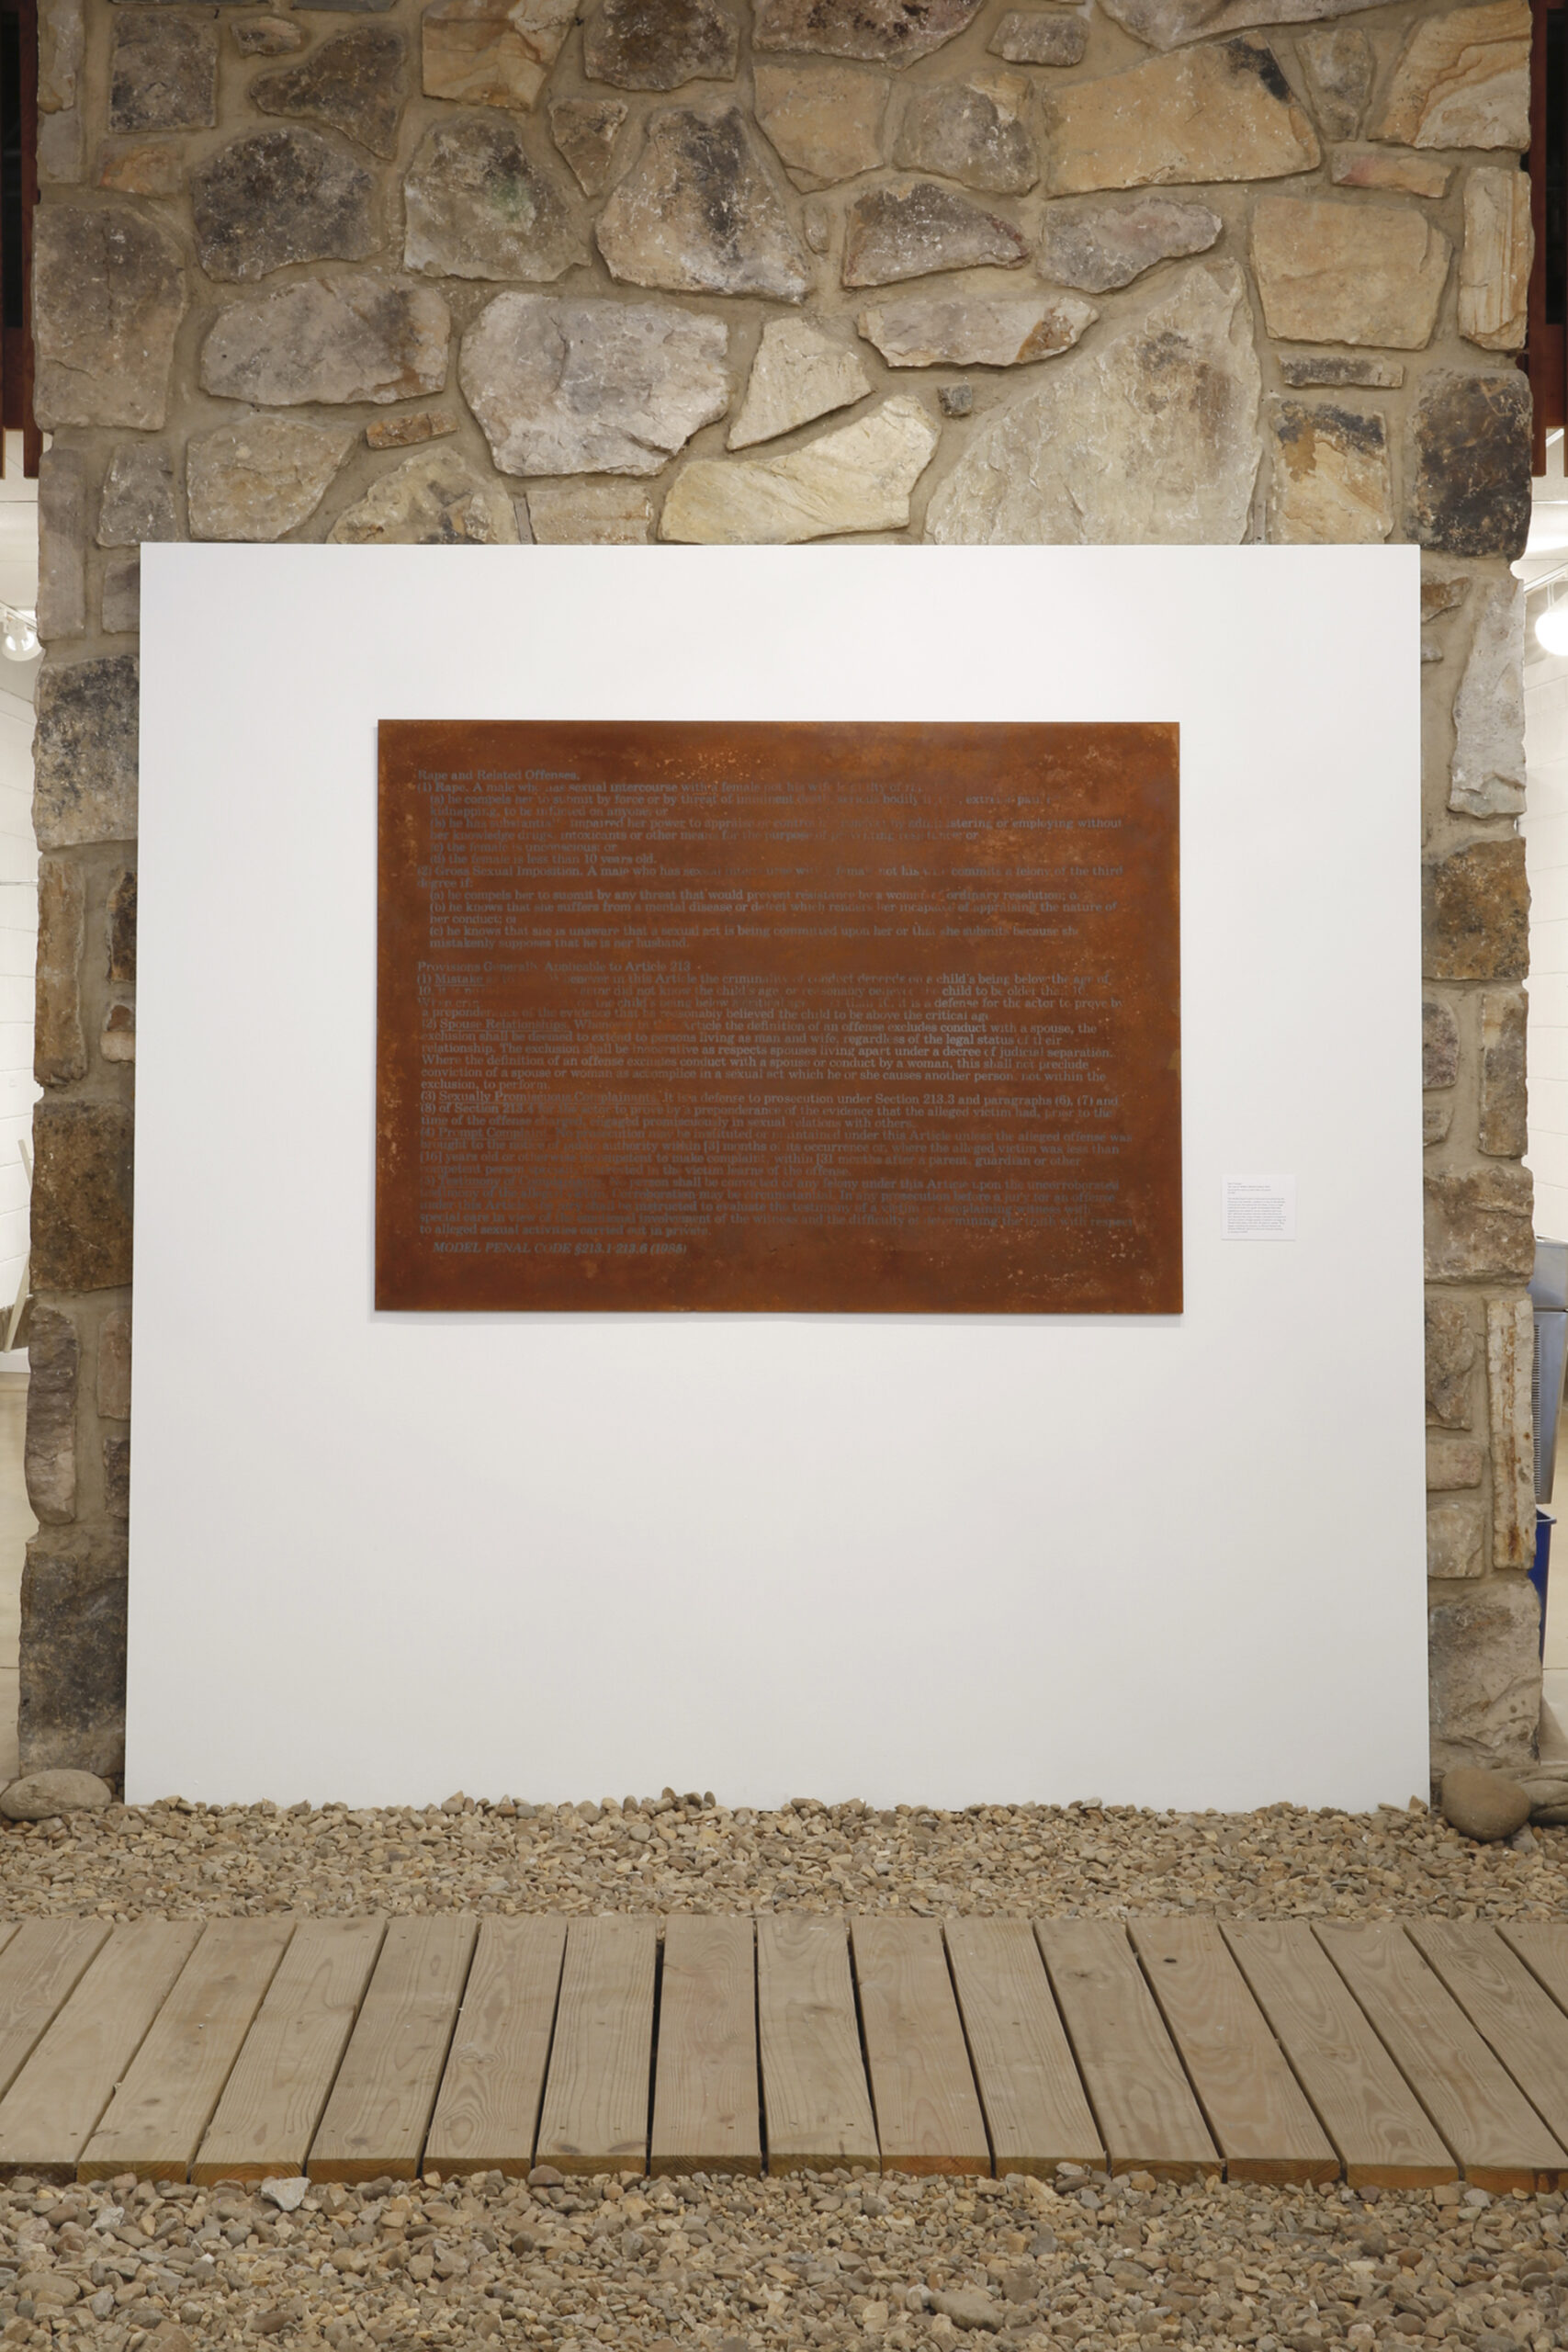 Screenprint resist on steel with rust patina, text of sections on rape from 1985 American Legal Institute Model Penal Code for standardizing state criminal laws